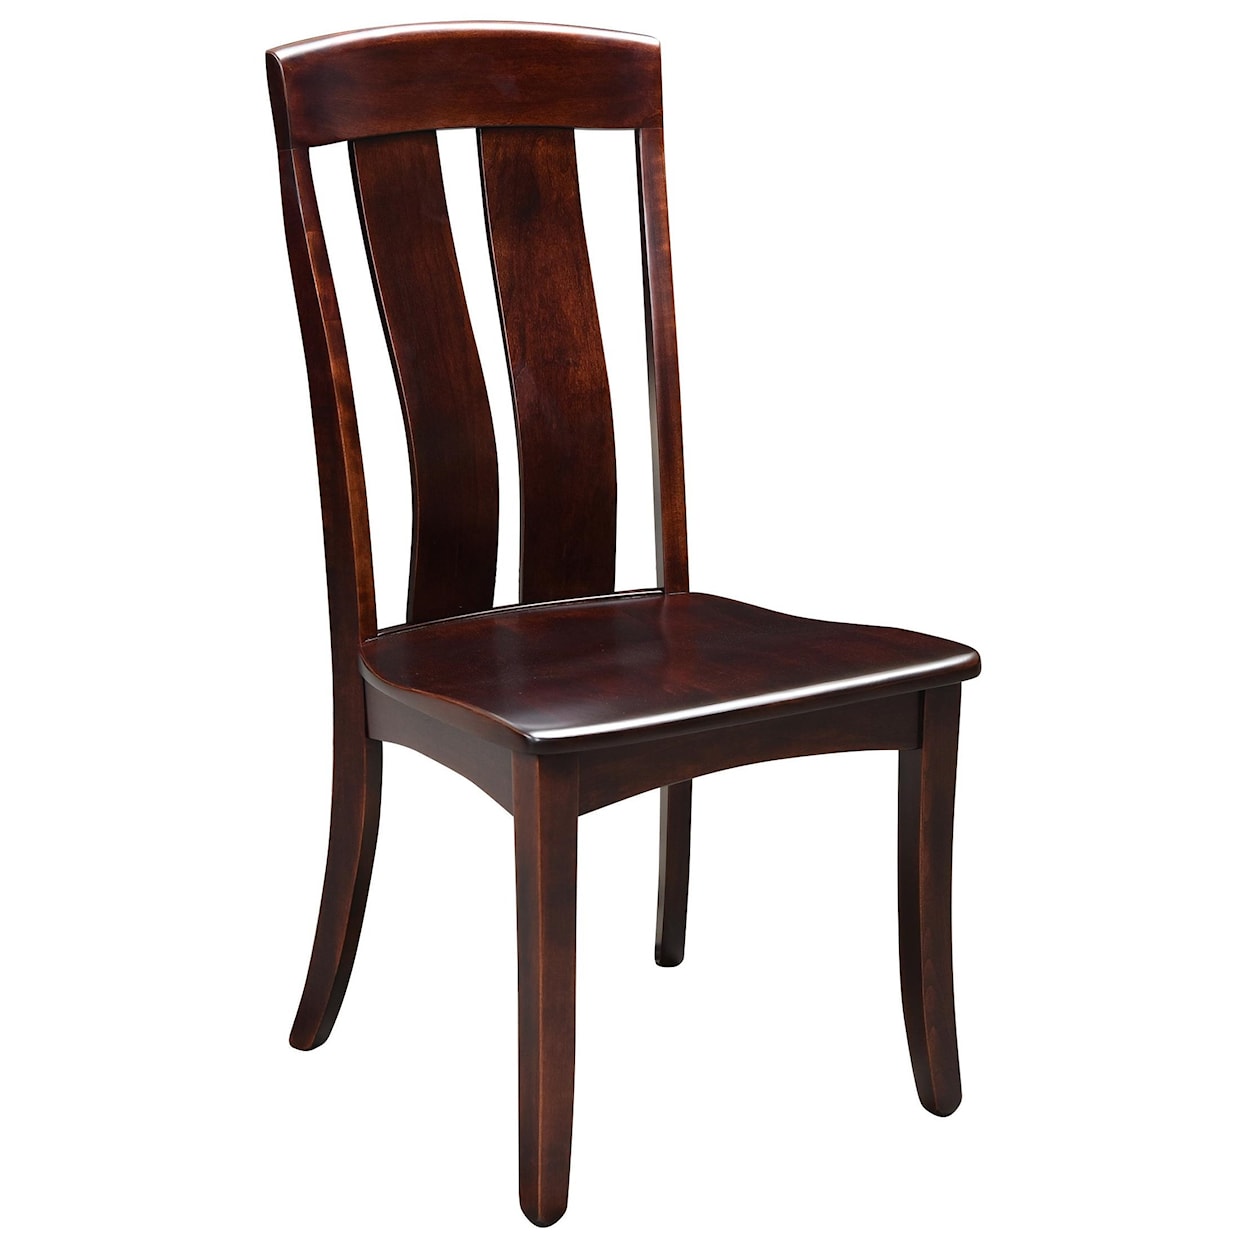 Wengerd Wood Products Cheyenne Side Chair